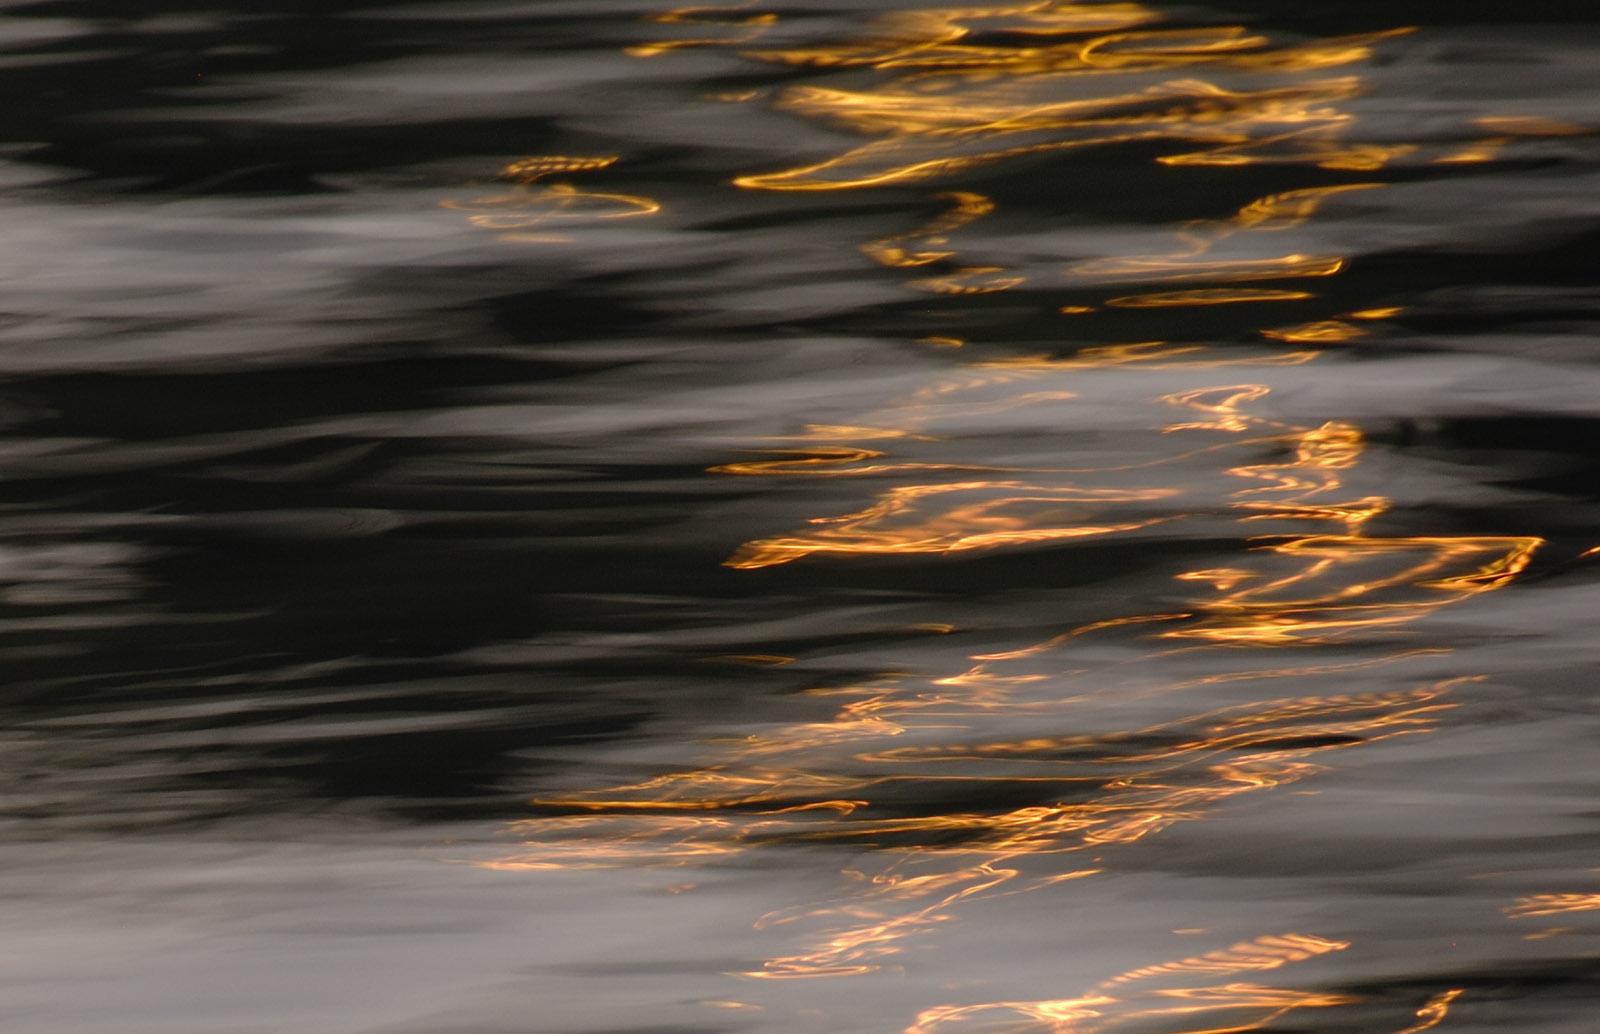 Water element 3 - Signed limited edition abstract pigment print, sun reflections - Abstract Photograph by Michael Banks